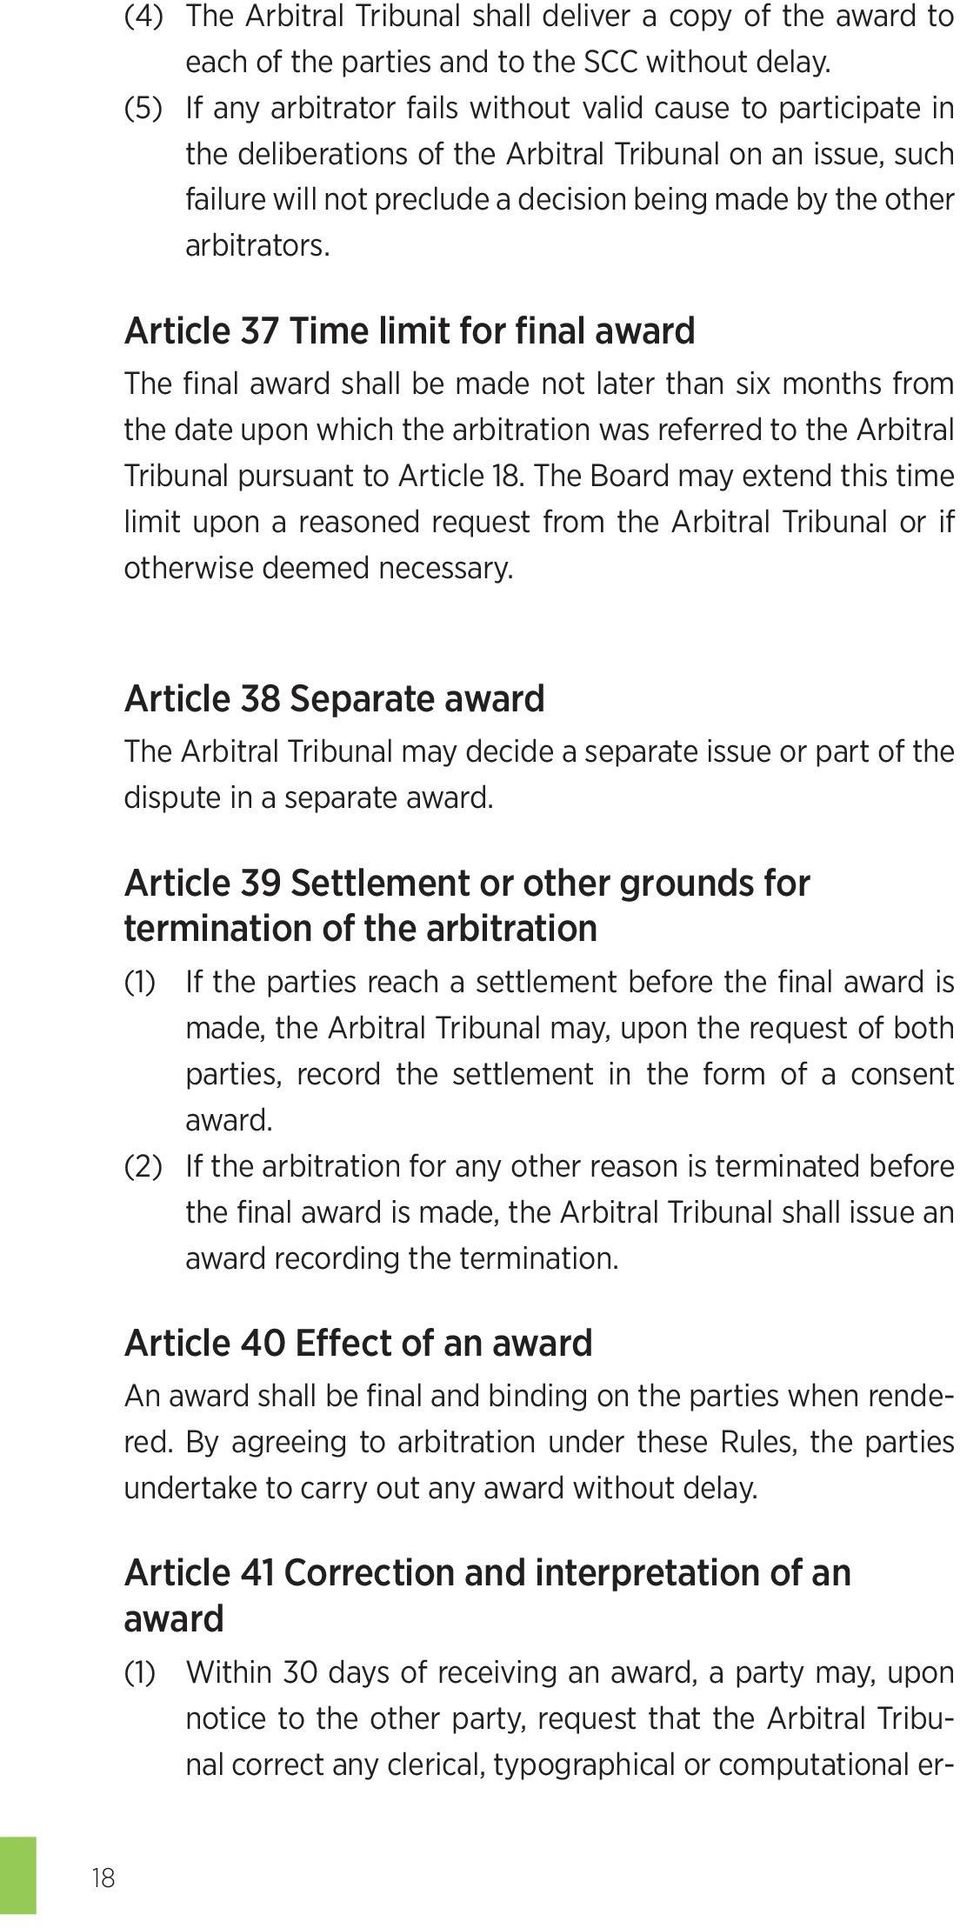 Article 37 Time limit for final award The final award shall be made not later than six months from the date upon which the arbitration was referred to the Arbitral Tribunal pursuant to Article 18.